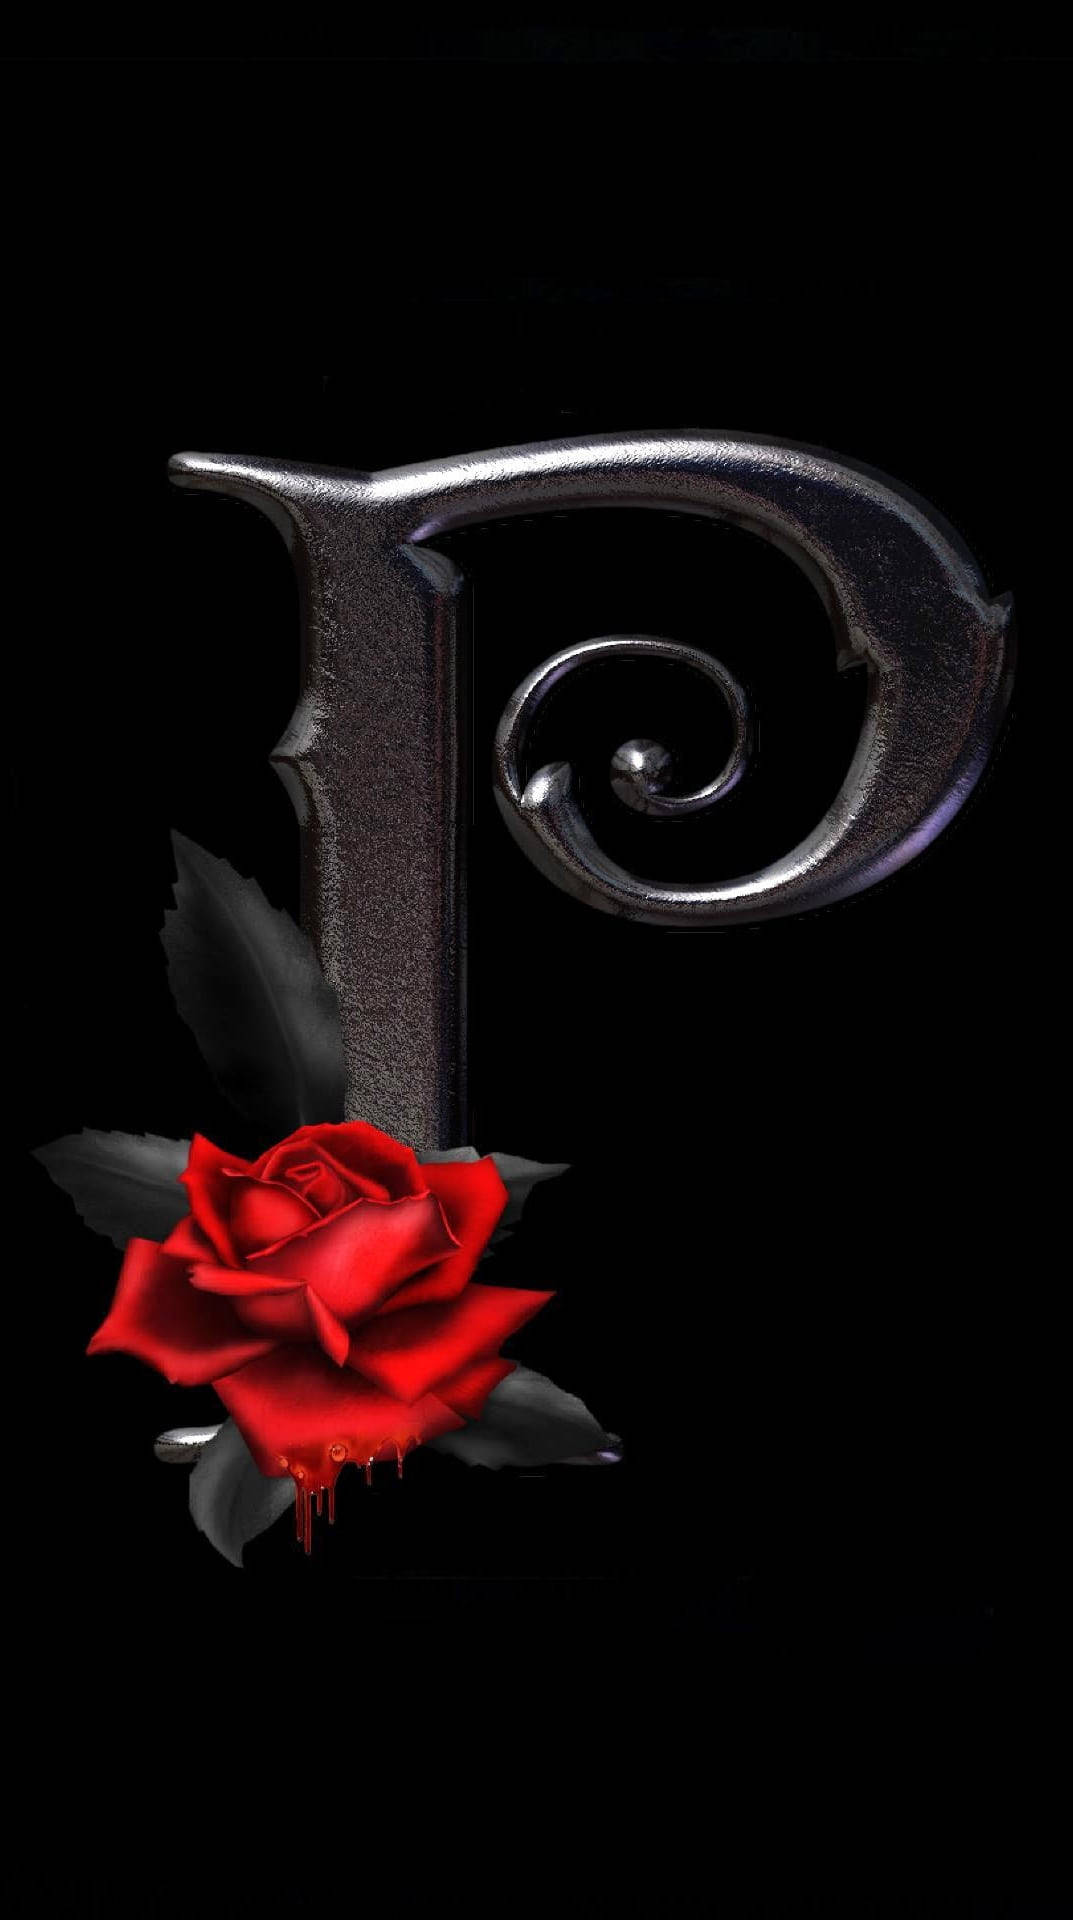 Metallic P Letter With Rose